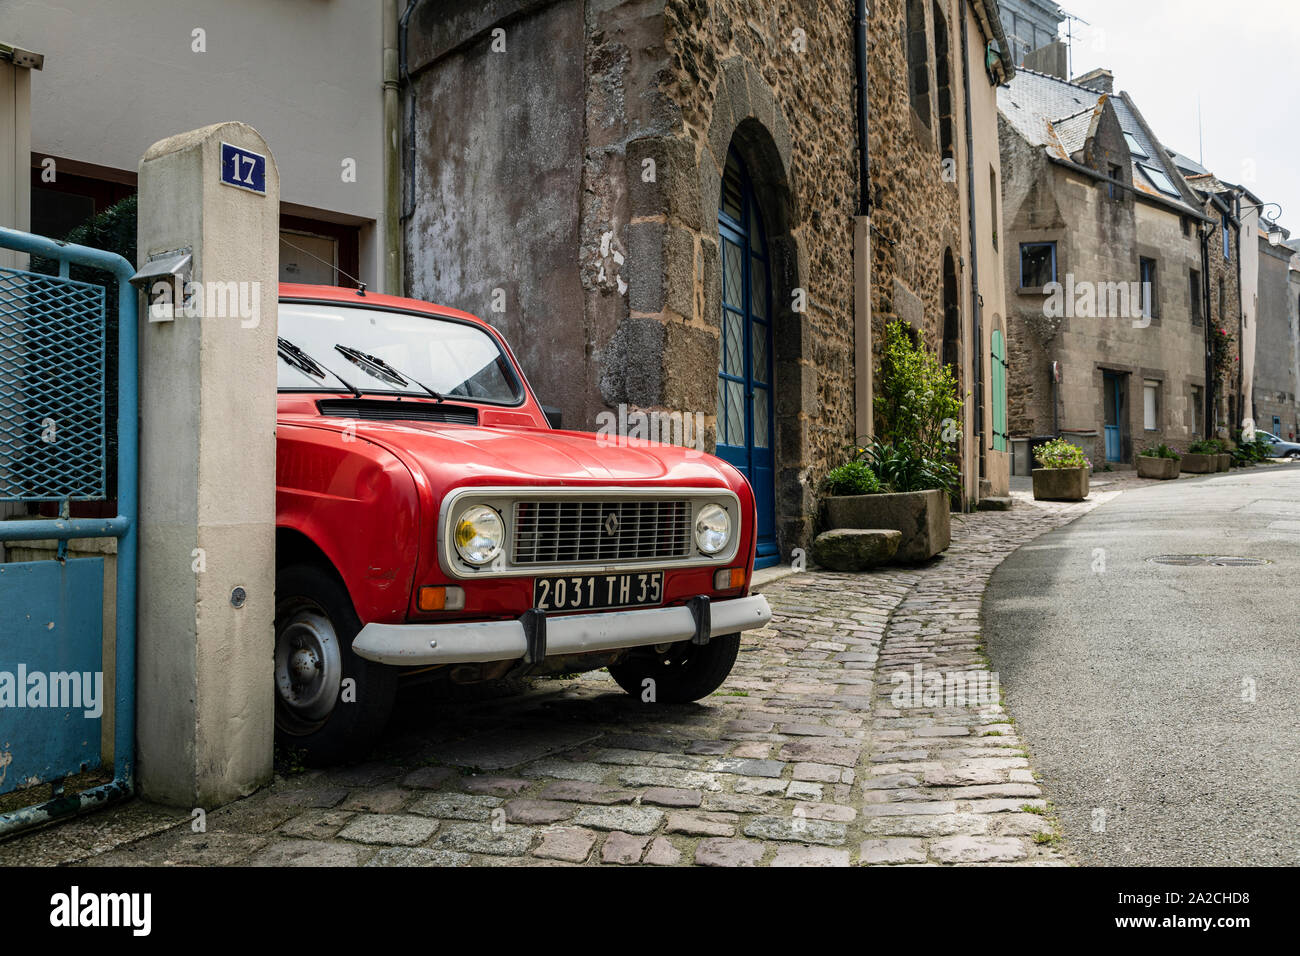 Old red Renault 4 parked in a sidestreet in Saint Servan, Saint Malo,Brittany, France Stock Photo